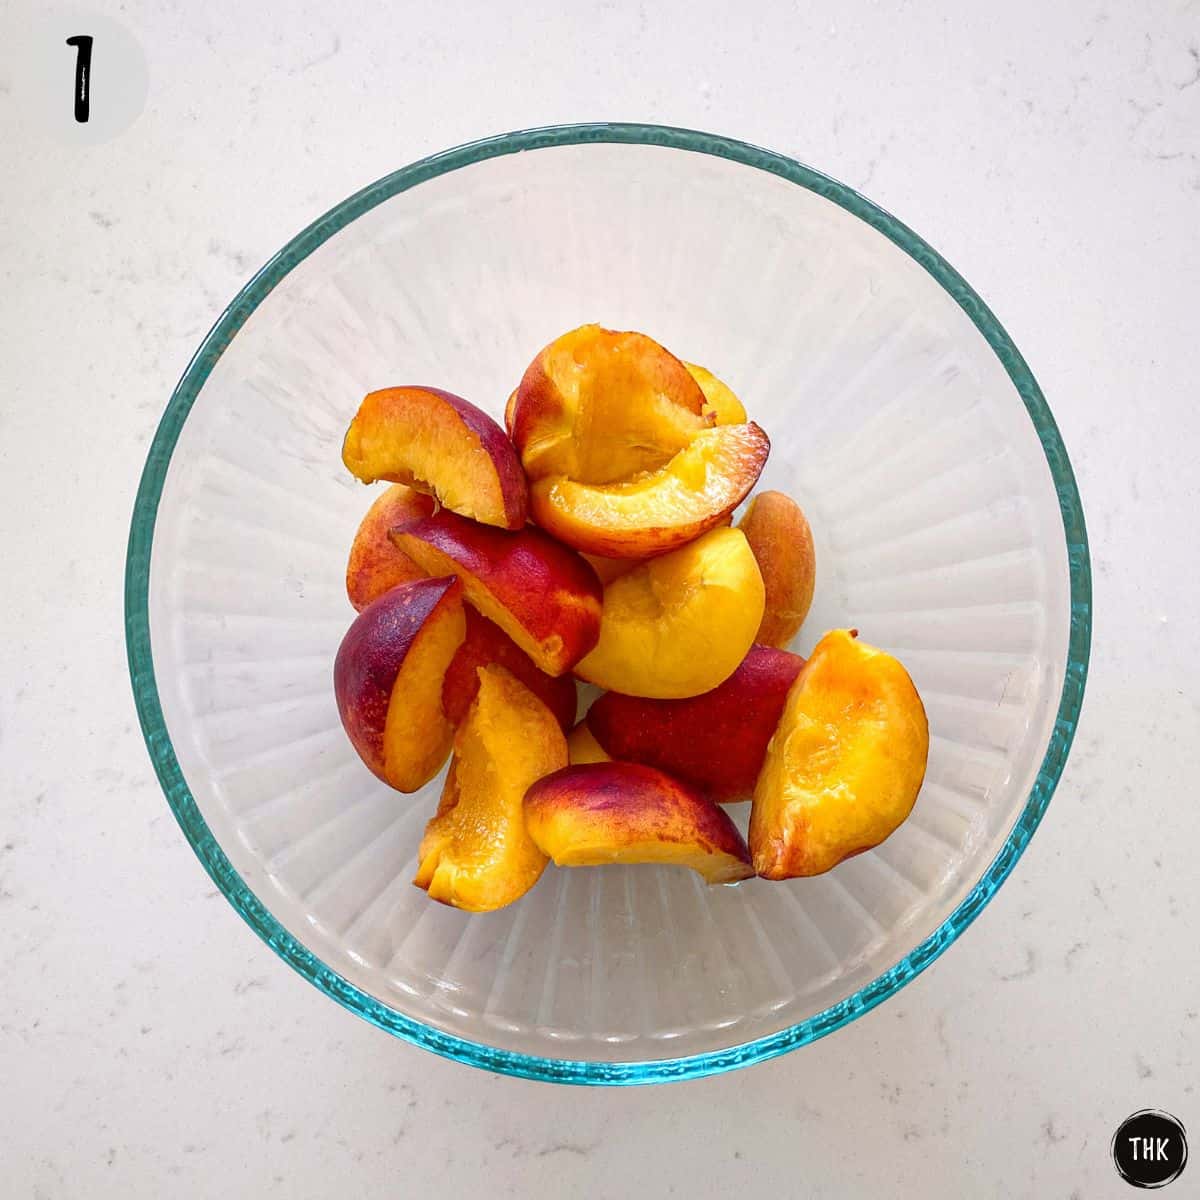 Sliced peaches in glass bowl.